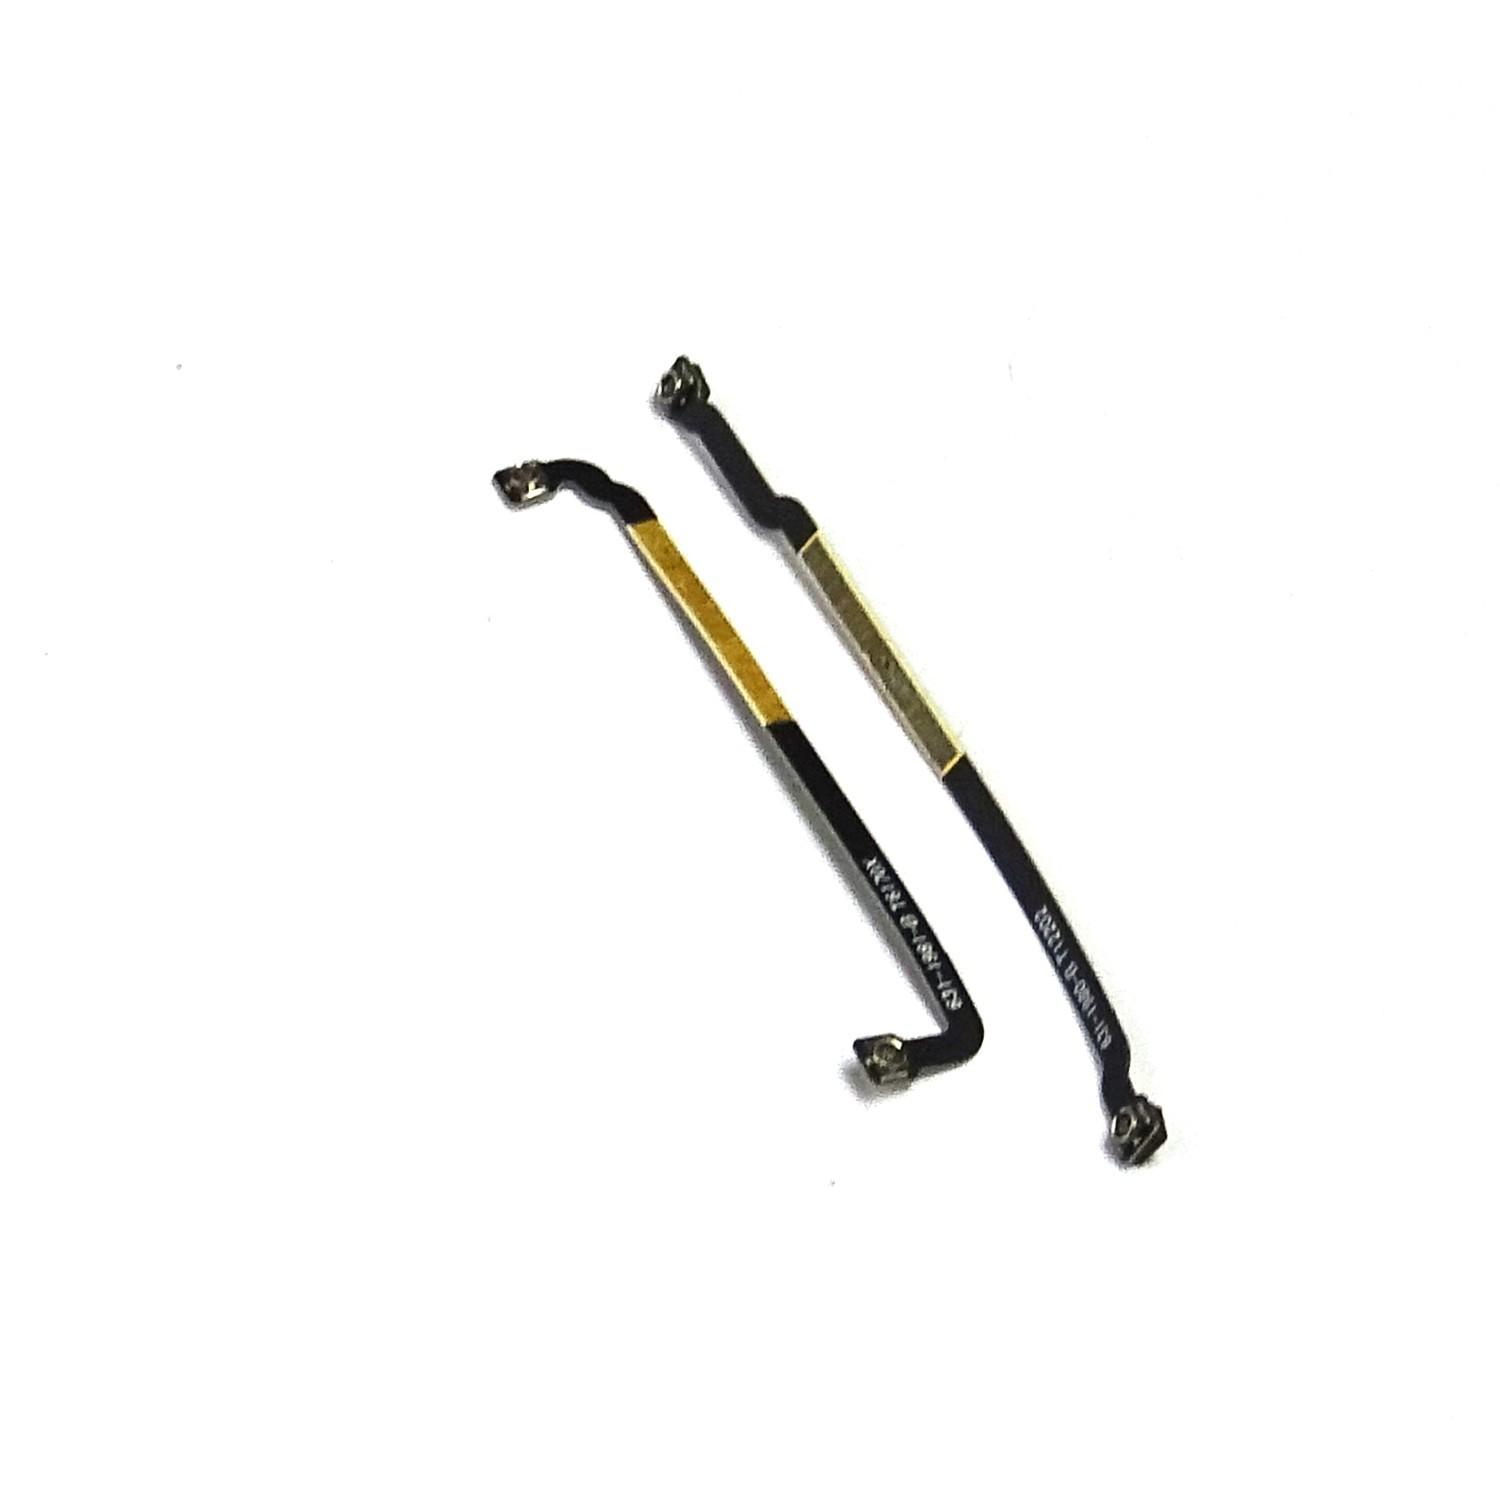 Mainboard Antenna Interconnect Connector Flex Cable Replacement iPhone 5 - UK Seller